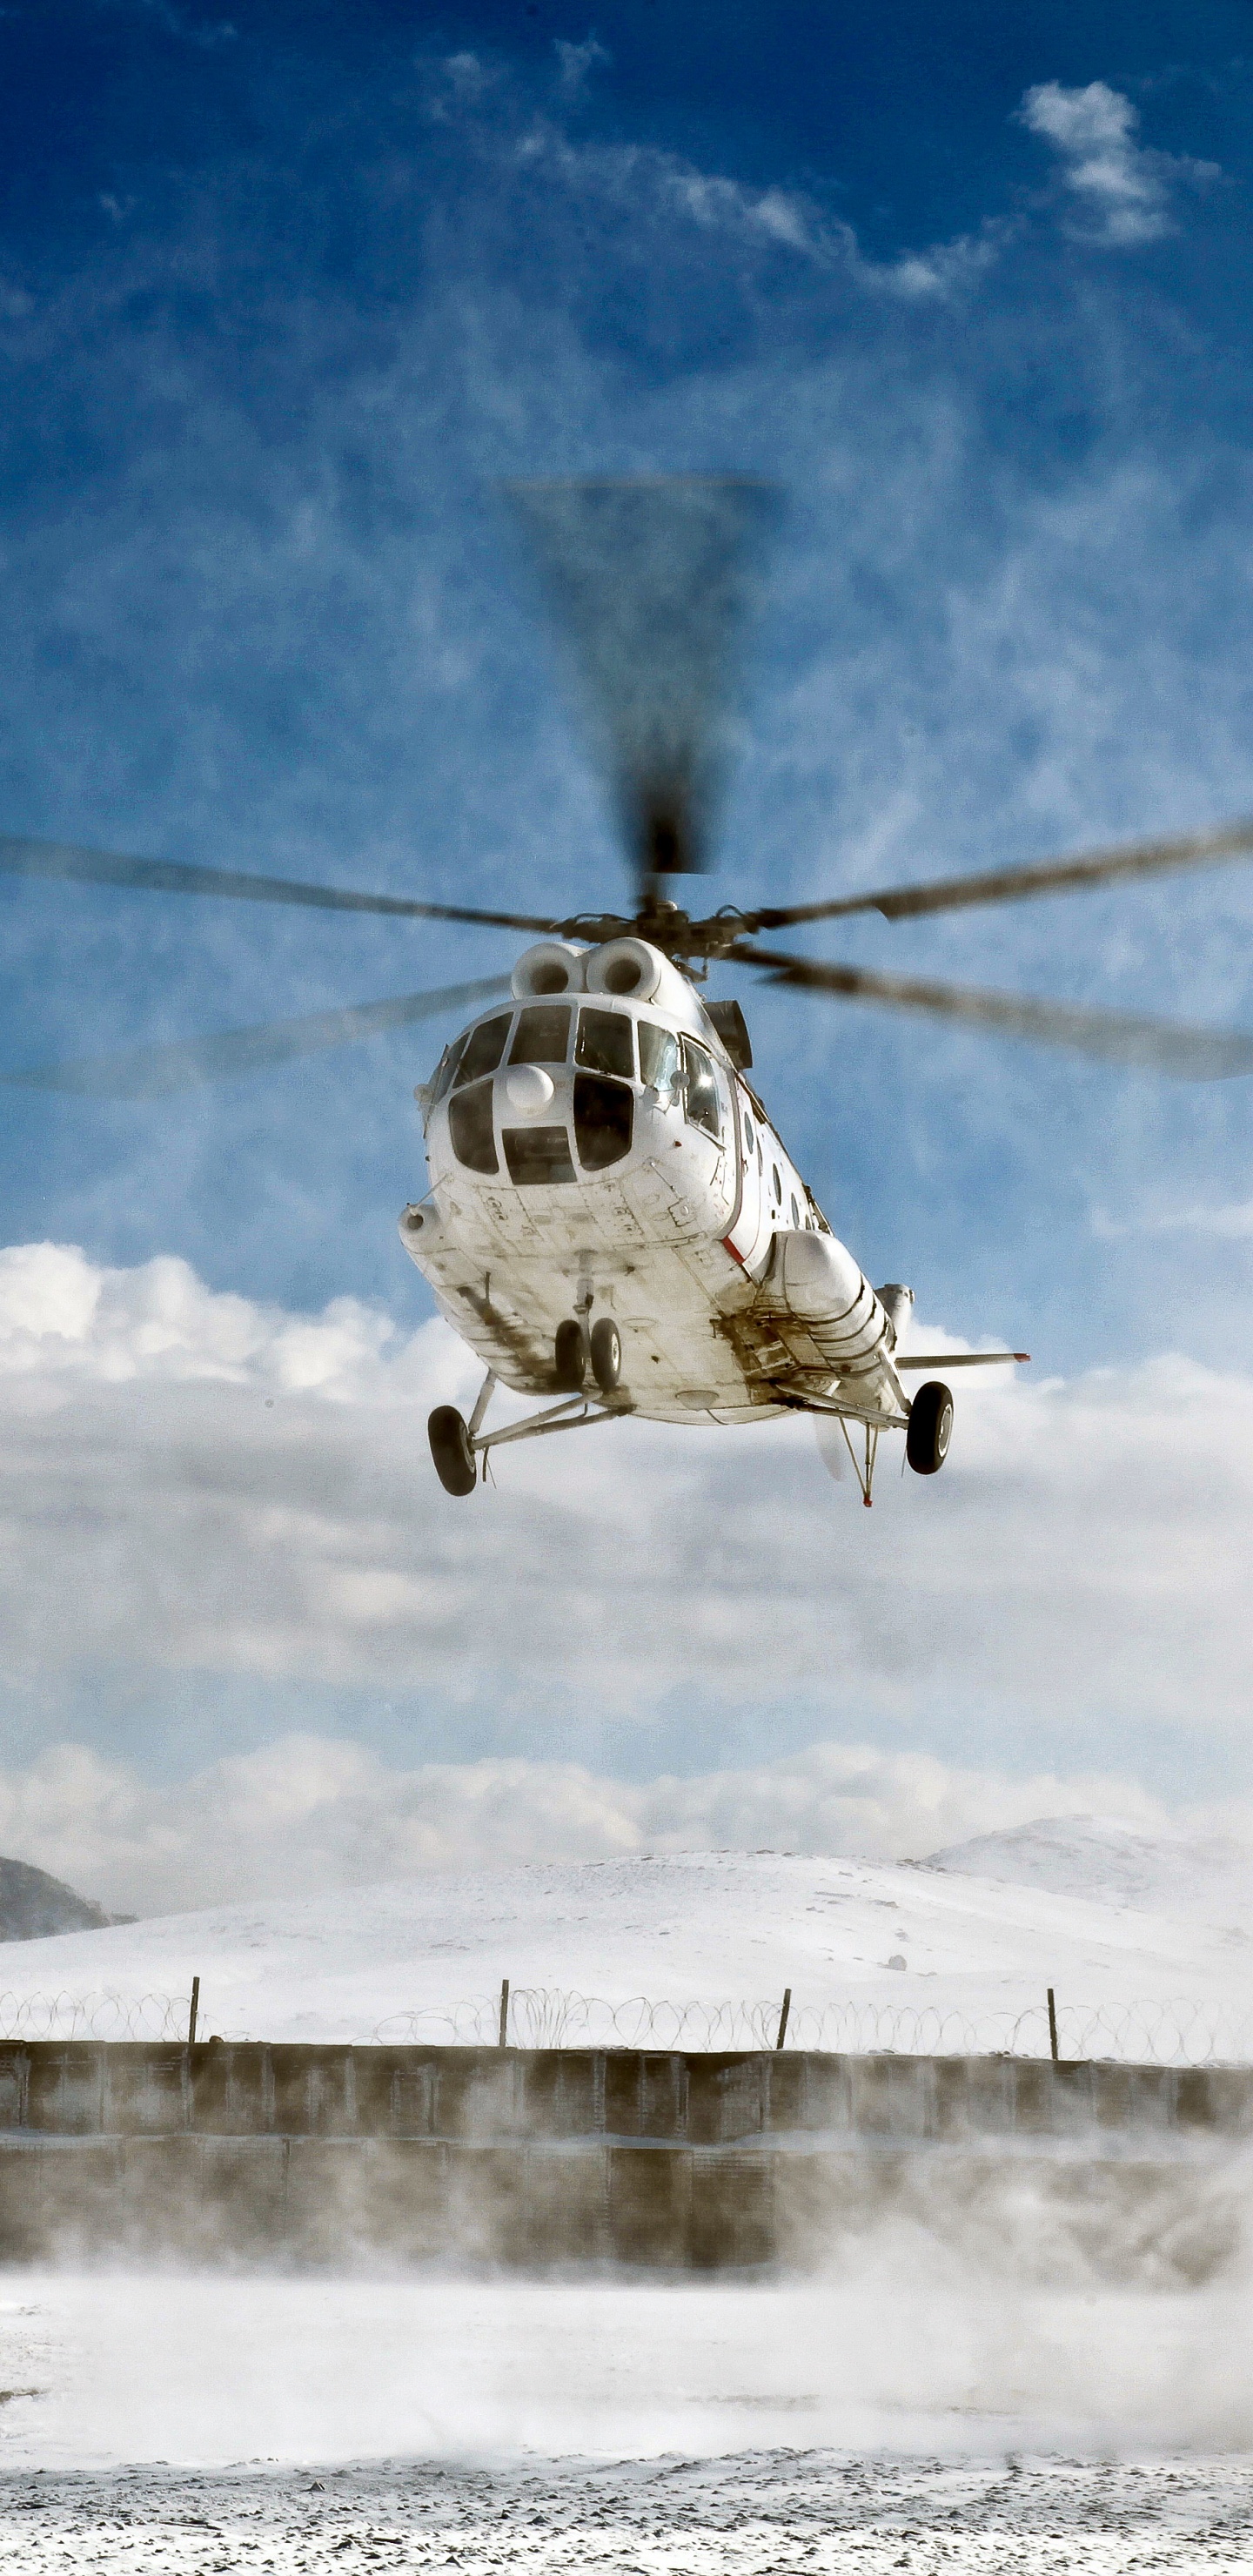 White and Black Helicopter Flying Over Snow Covered Mountain During Daytime. Wallpaper in 1440x2960 Resolution